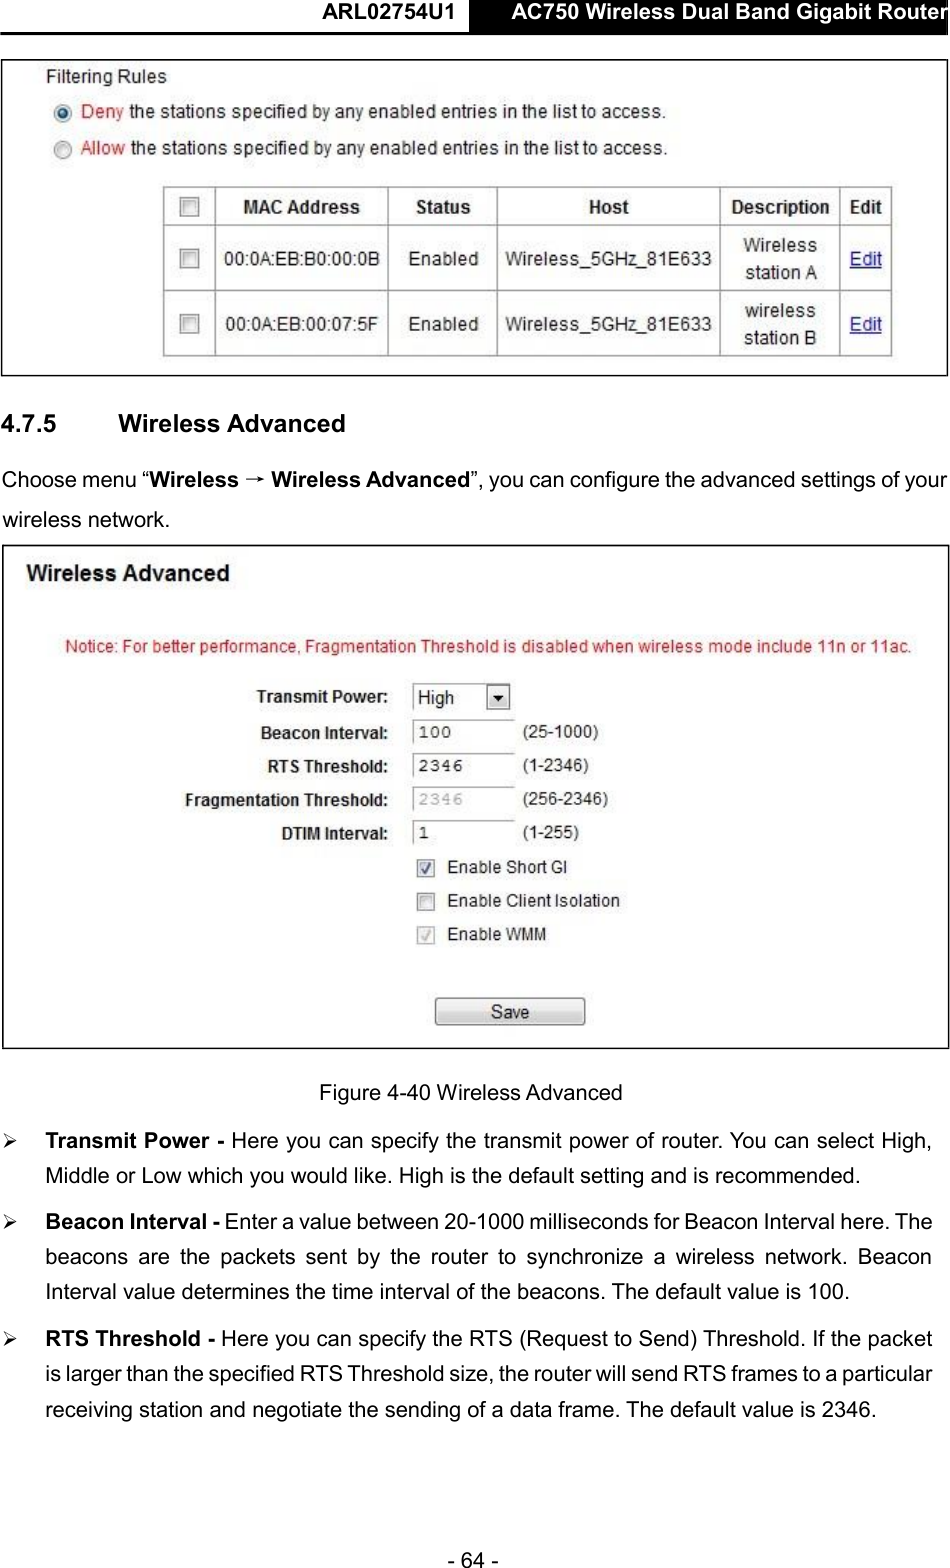  ARL02754U1  AC750 Wireless Dual Band Gigabit Router    - 64 -   Choose menu “Wireless → Wireless Advanced”, you can configure the advanced settings of your wireless network.   Figure 4-40 Wireless Advanced   Transmit Power - Here you can specify the transmit power of router. You can select High, Middle or Low which you would like. High is the default setting and is recommended.   Beacon Interval - Enter a value between 20-1000 milliseconds for Beacon Interval here. The beacons  are  the  packets  sent  by  the  router  to  synchronize  a  wireless  network.  Beacon Interval value determines the time interval of the beacons. The default value is 100.    RTS Threshold - Here you can specify the RTS (Request to Send) Threshold. If the packet is larger than the specified RTS Threshold size, the router will send RTS frames to a particular receiving station and negotiate the sending of a data frame. The default value is 2346.     4.7.5   Wireless Advanced    